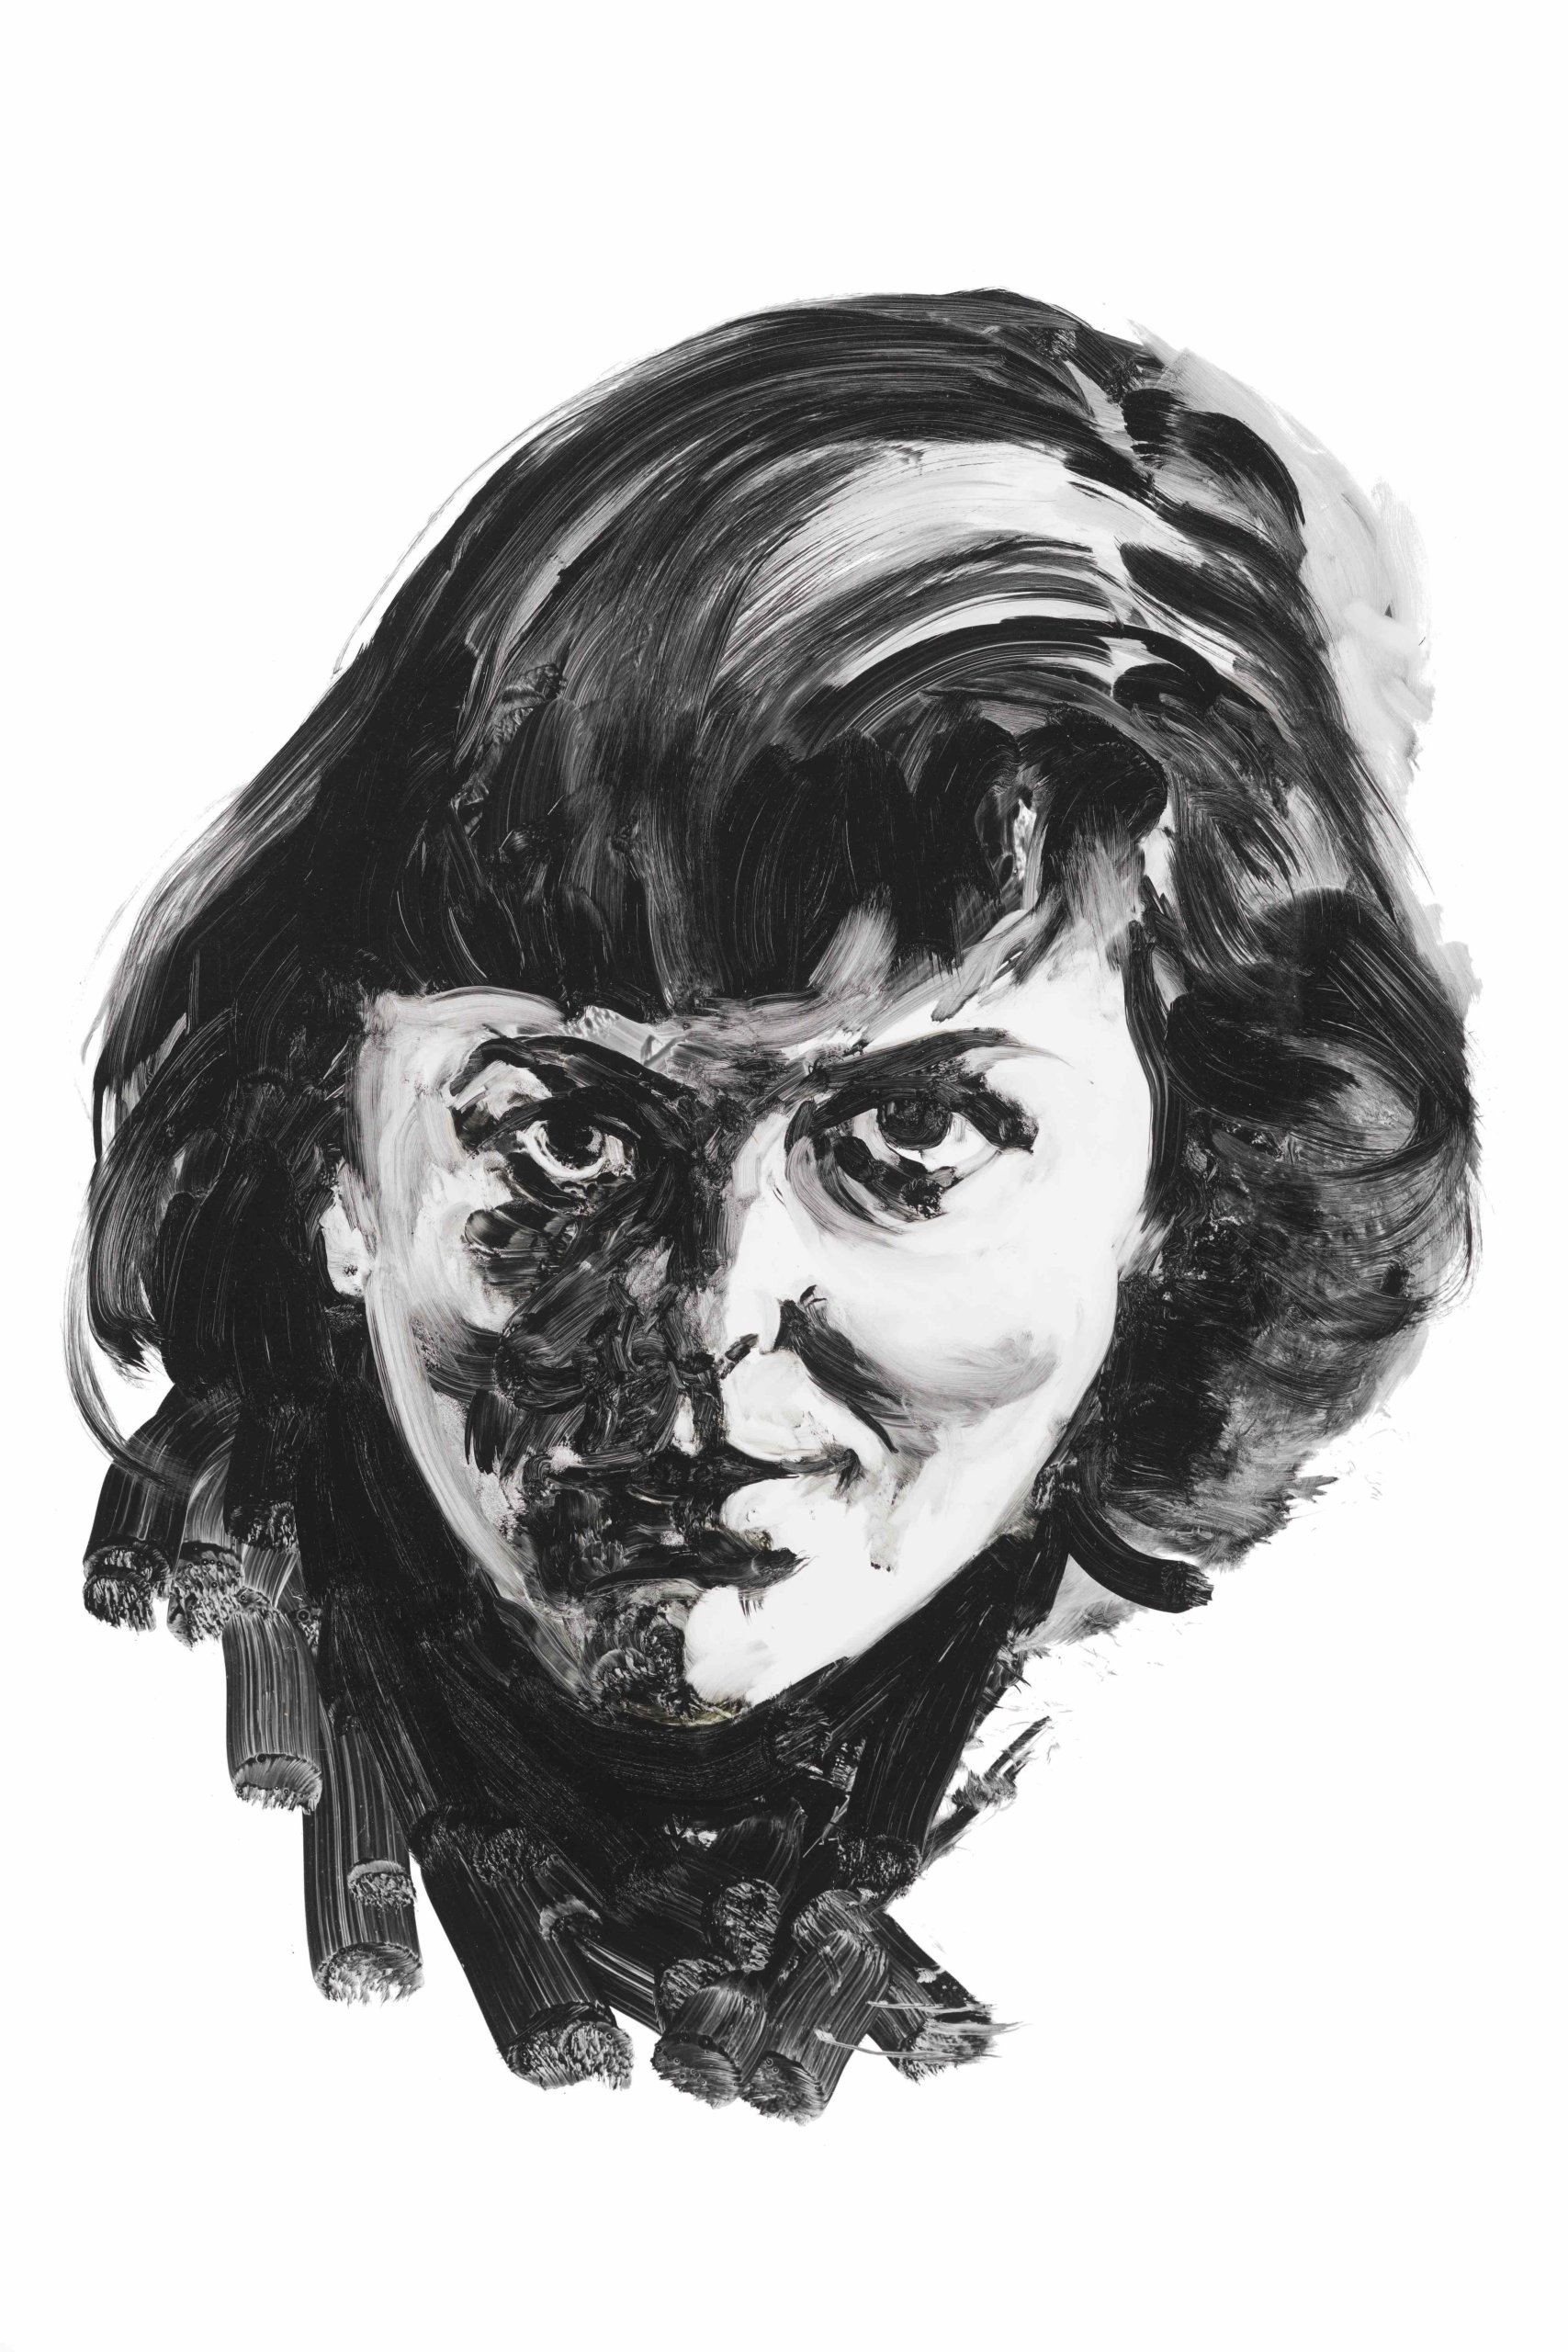 Lady Caroline Blackwood, as depicted by Eric Fischl